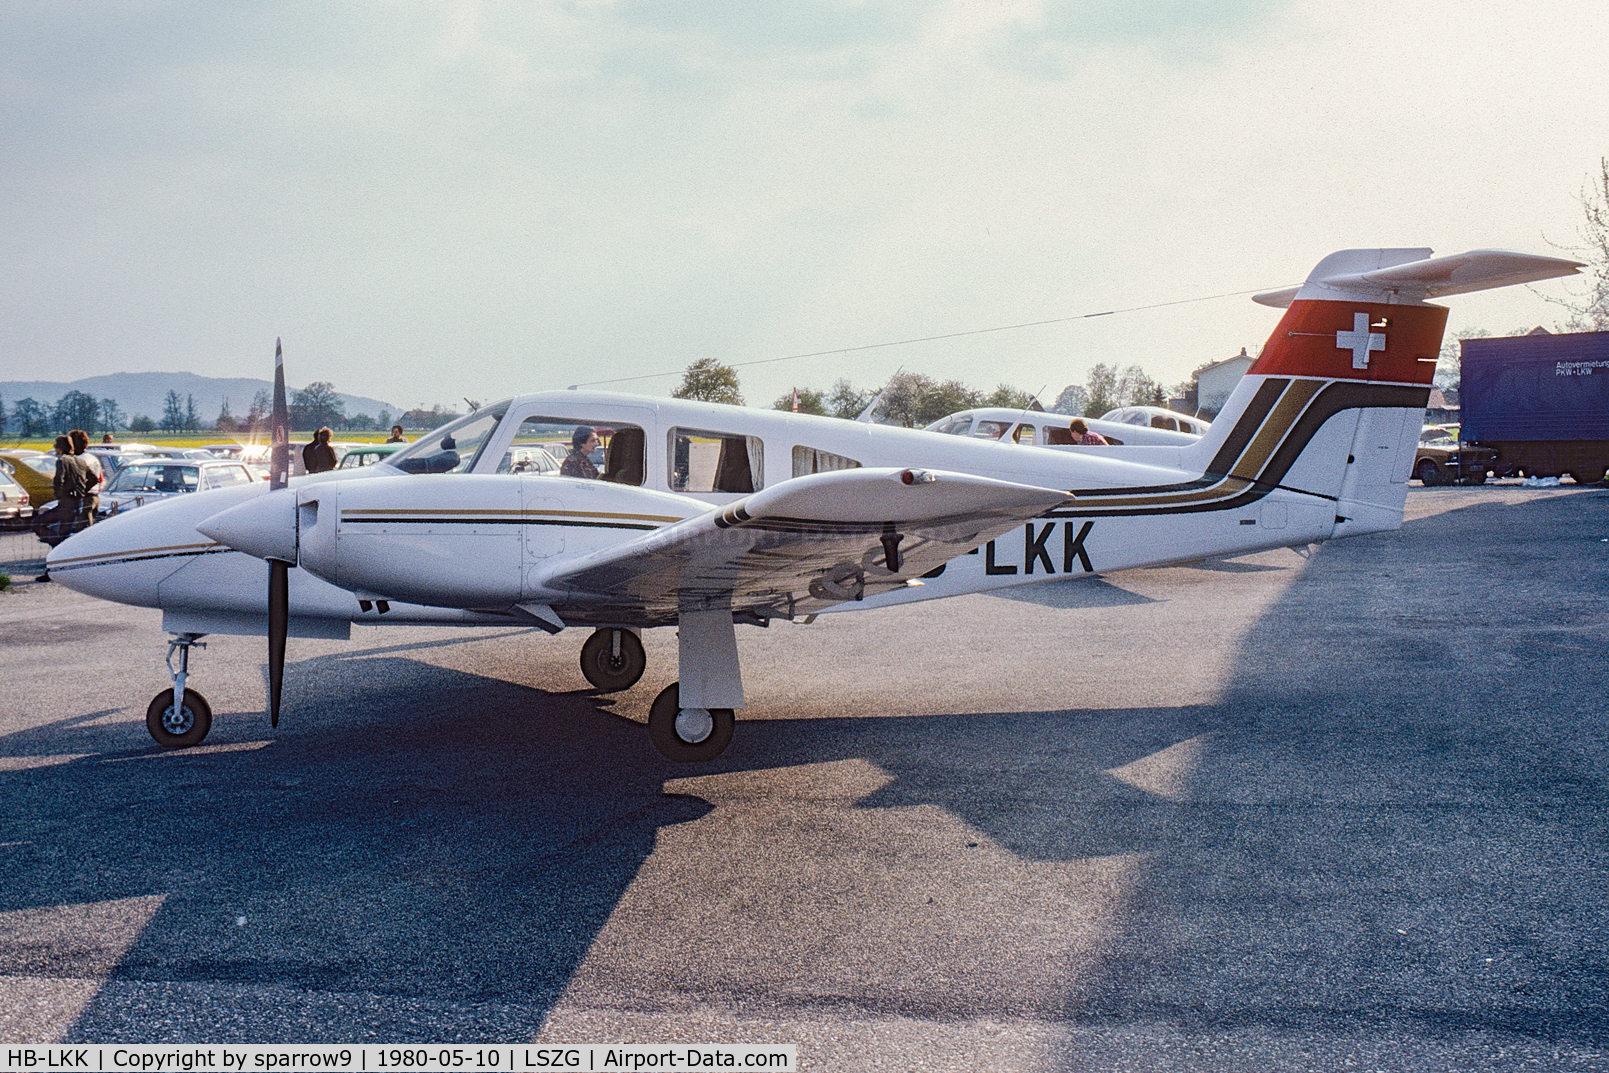 HB-LKK, 1979 Piper PA-44-180 Seminole C/N 44-7995087, GA-show at Grenchen. Scanned from a slide.